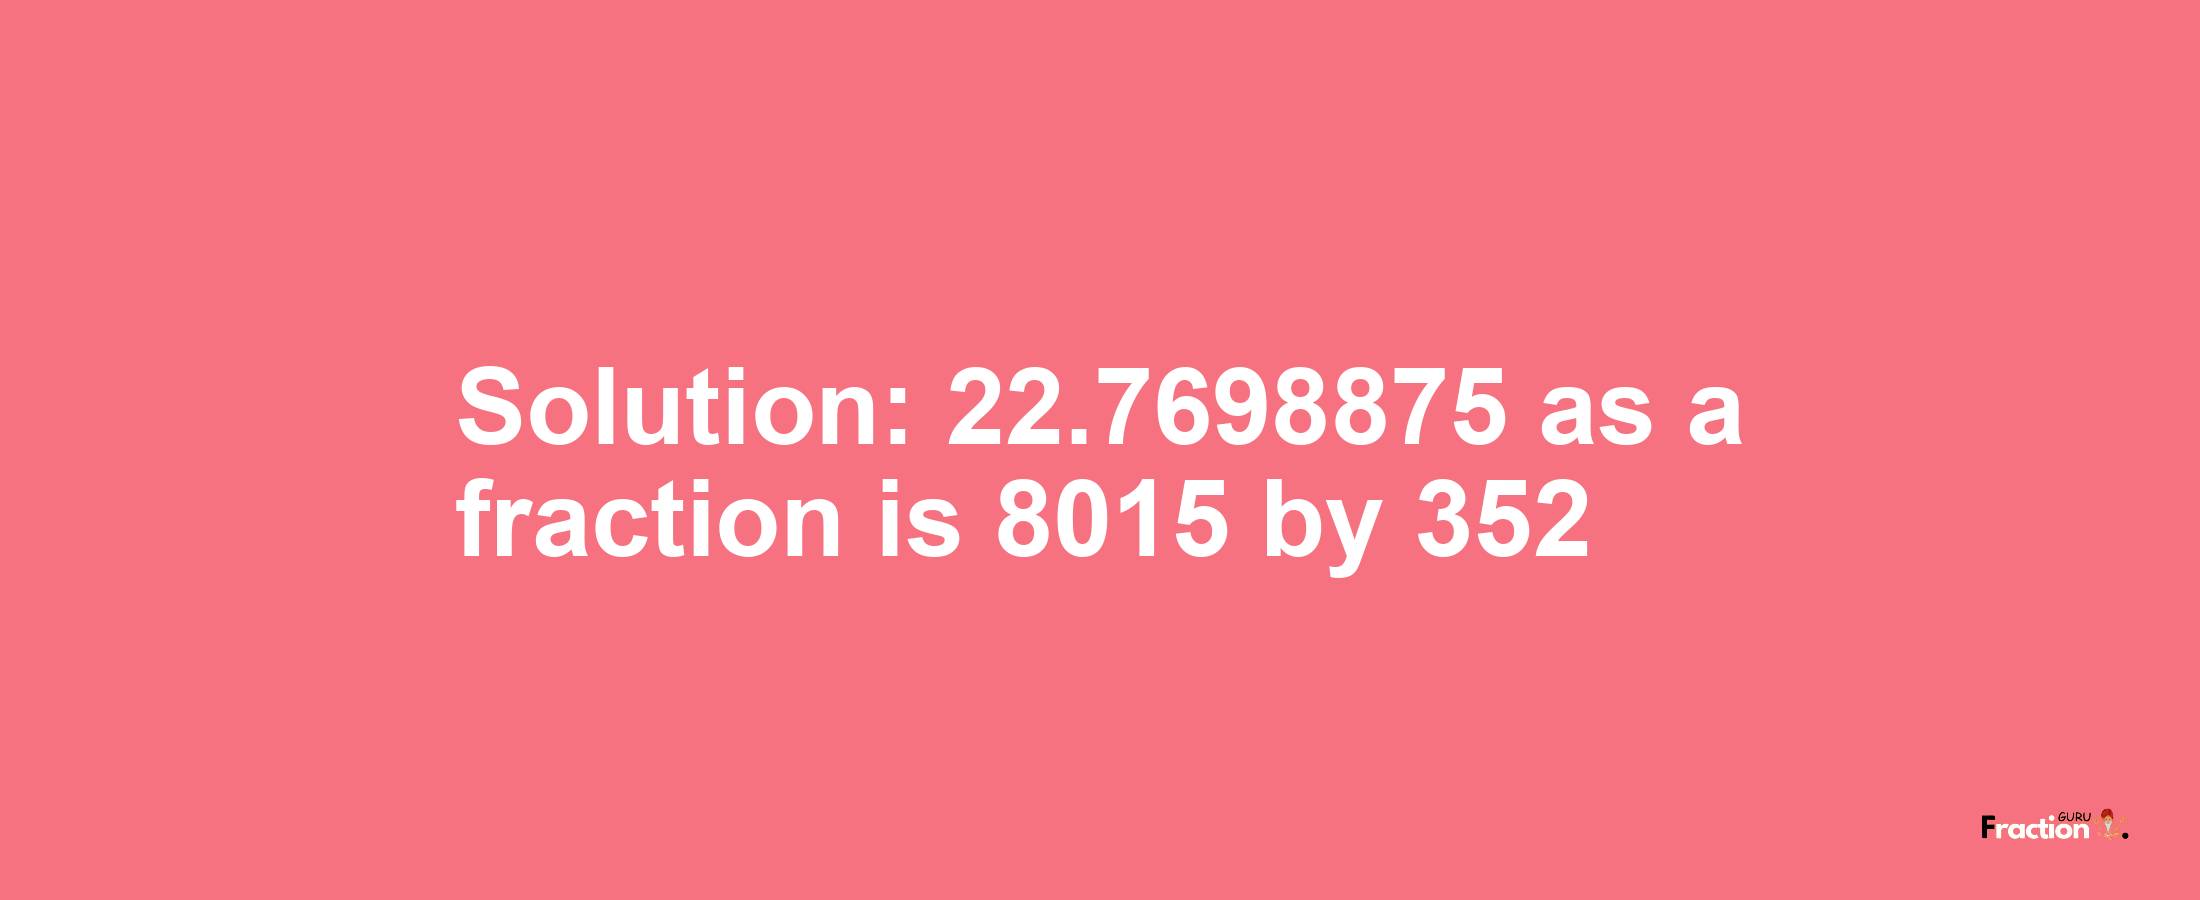 Solution:22.7698875 as a fraction is 8015/352